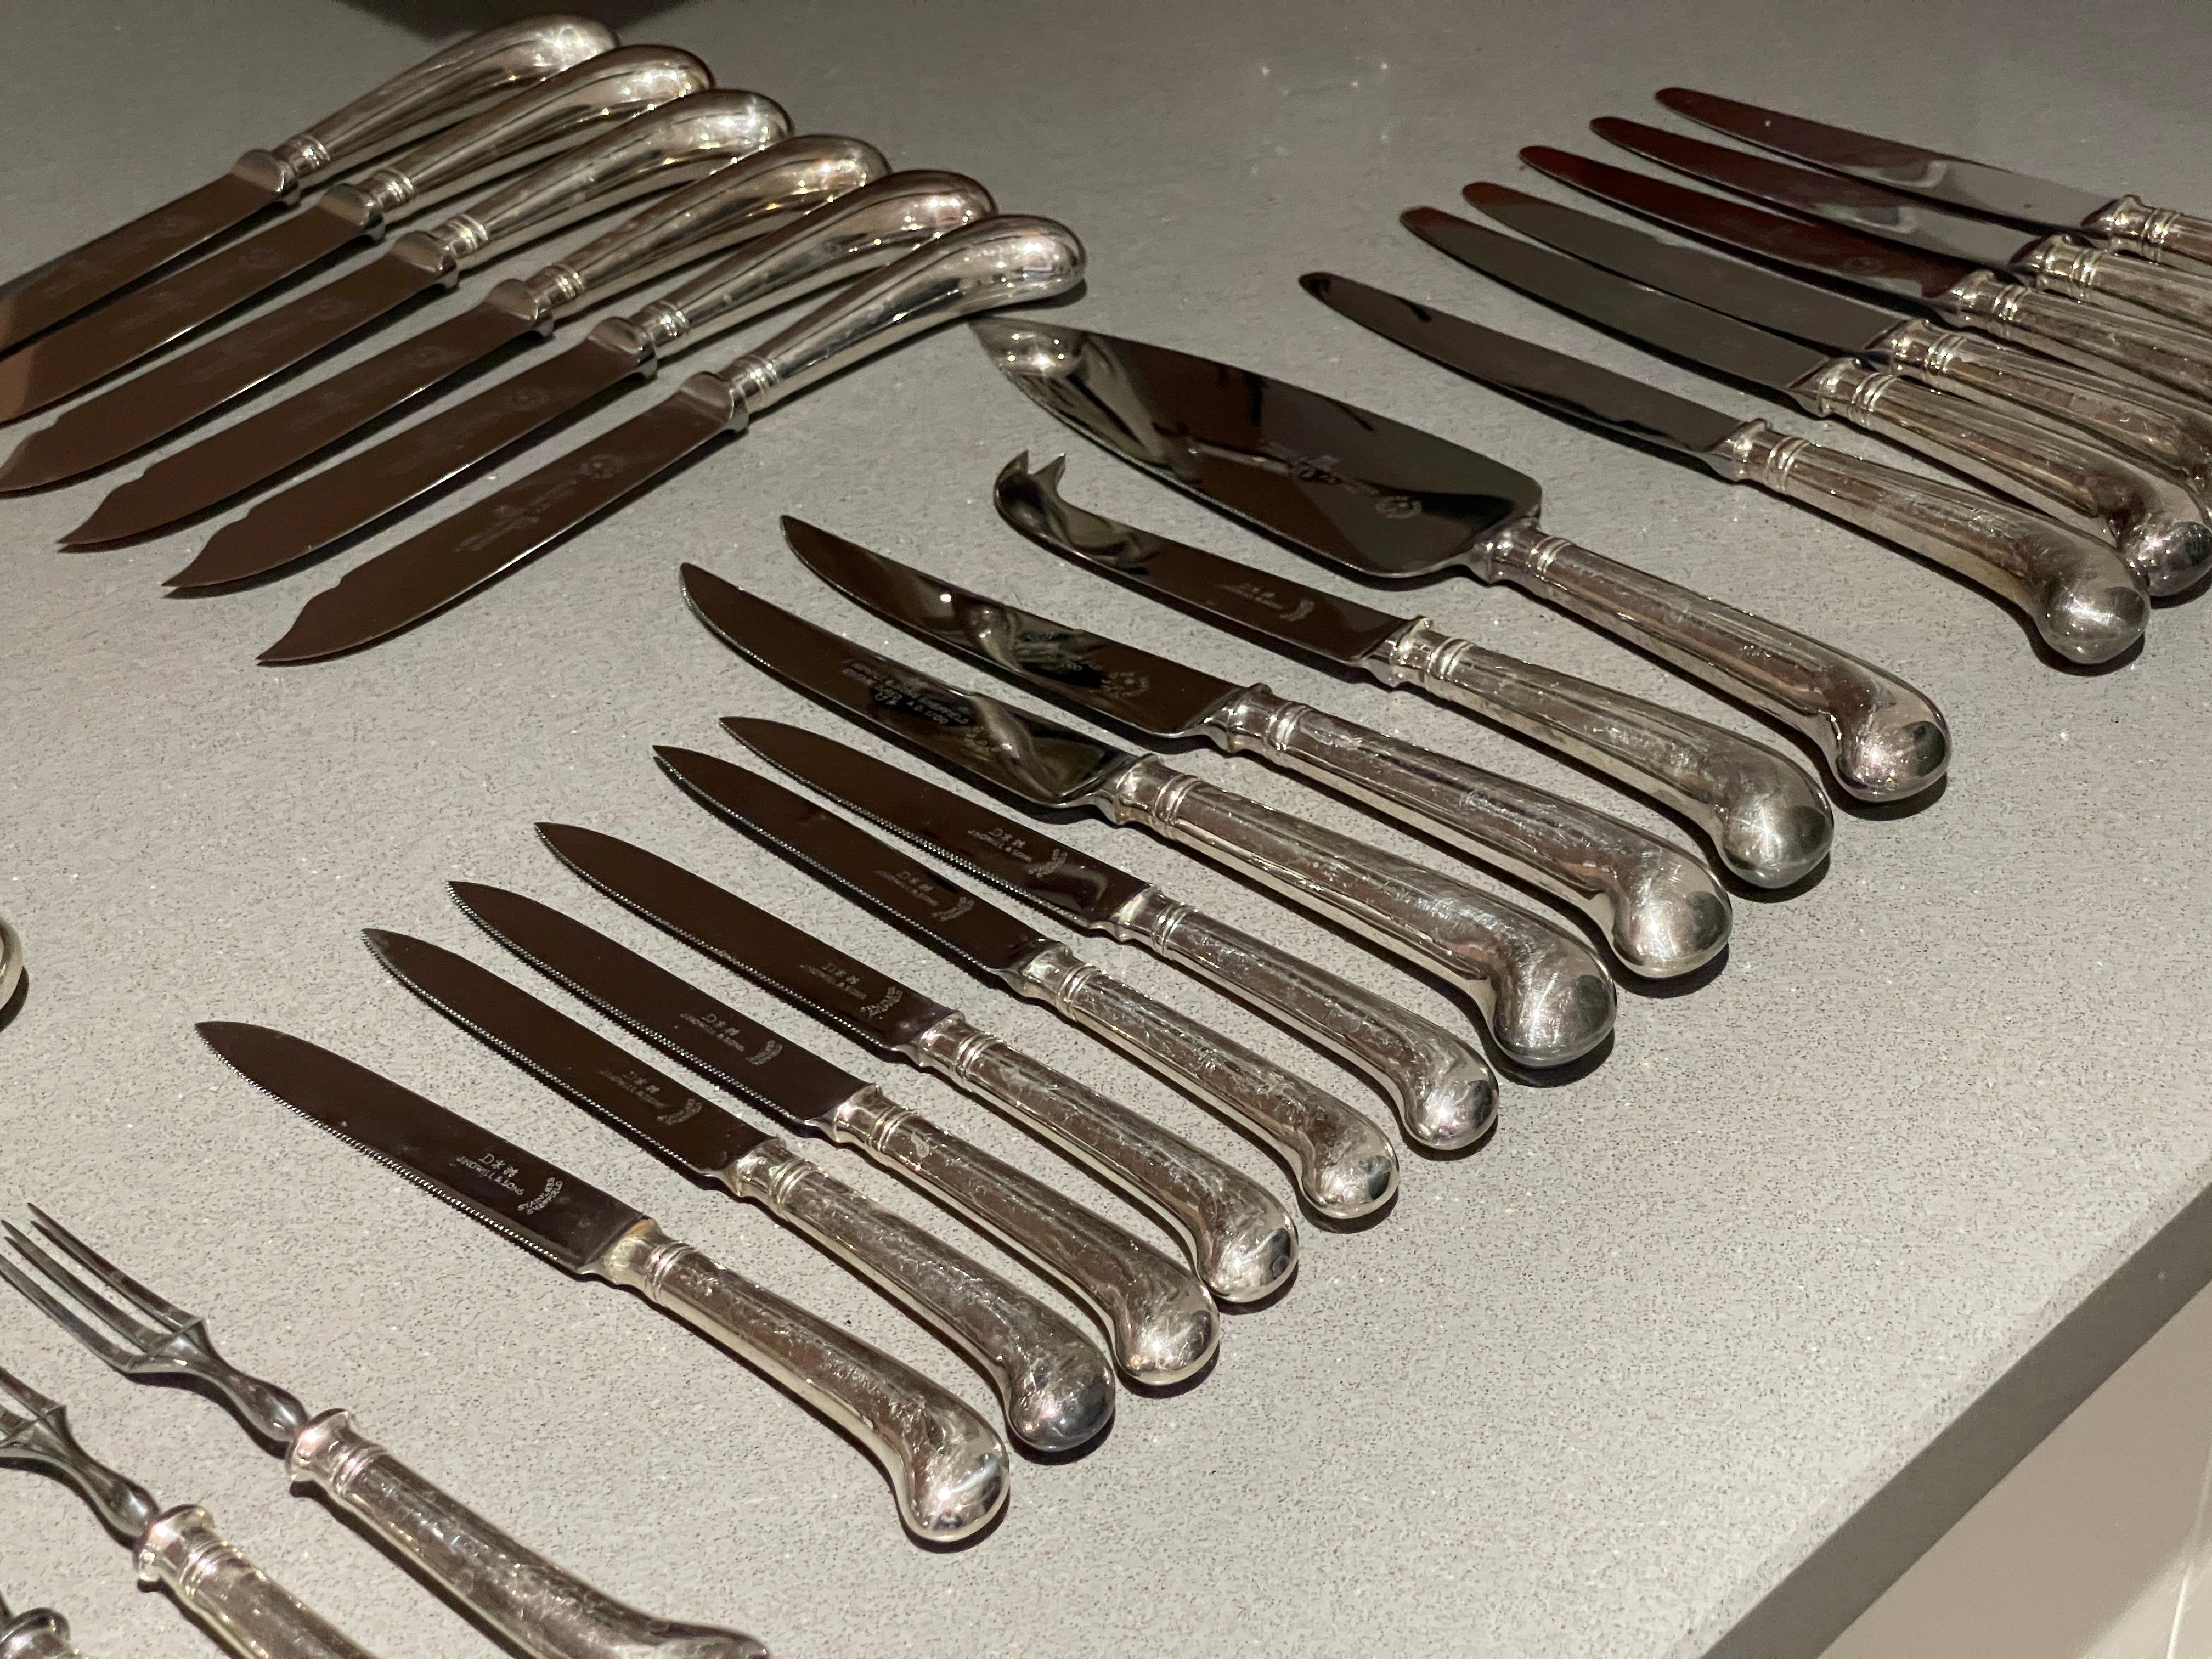 Stainless Steel A set of Cutlery 37 Table Knife Fork Stainless Sheffield England 1930s Art Deco For Sale